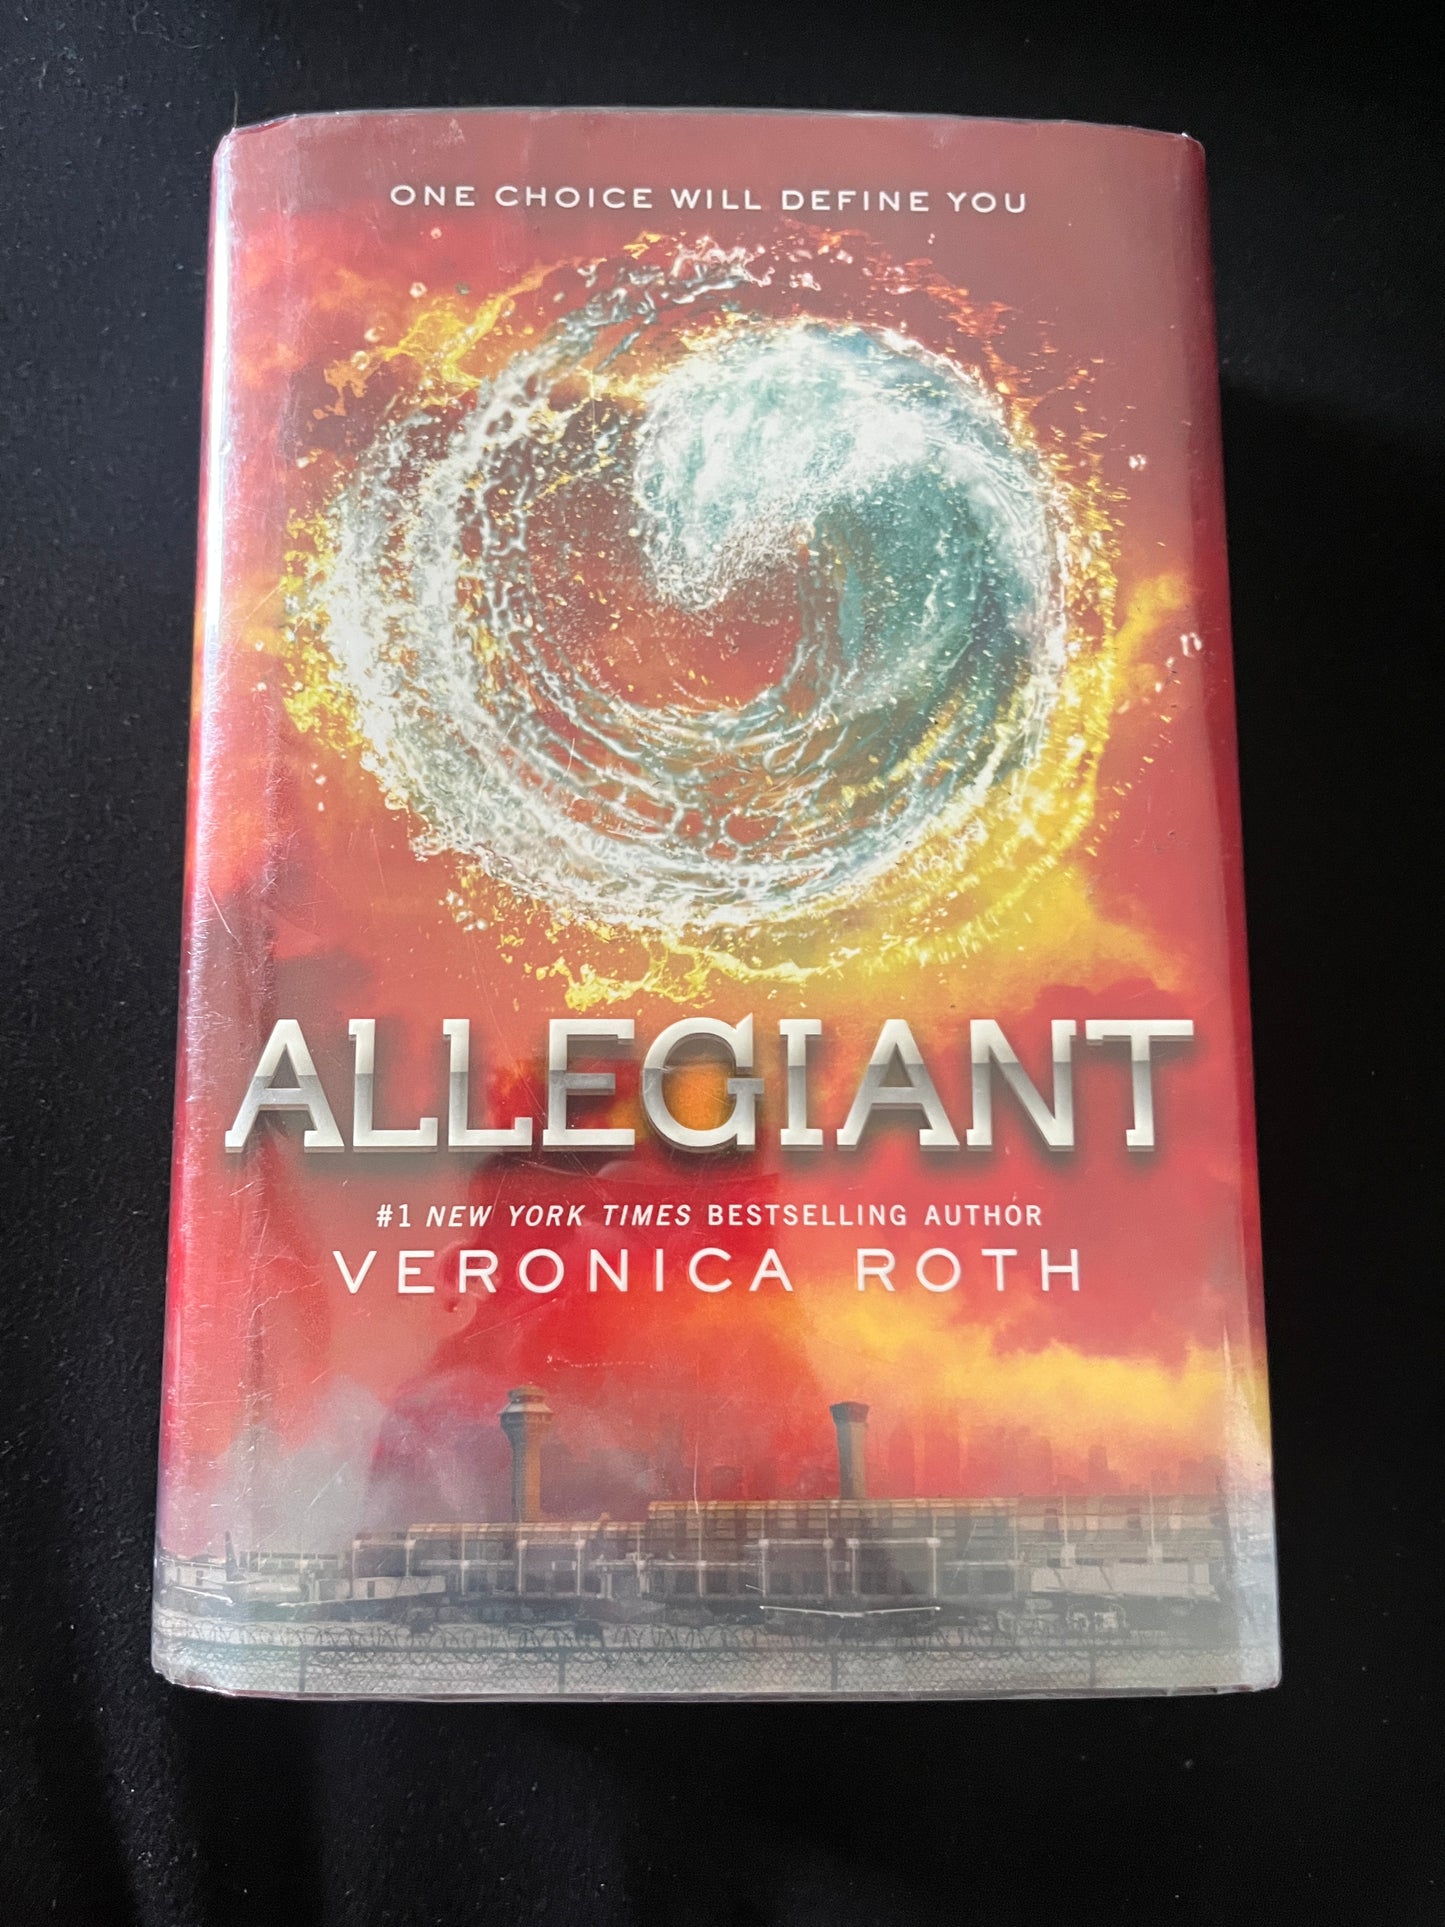 ALLEGIANT by Veronica Roth